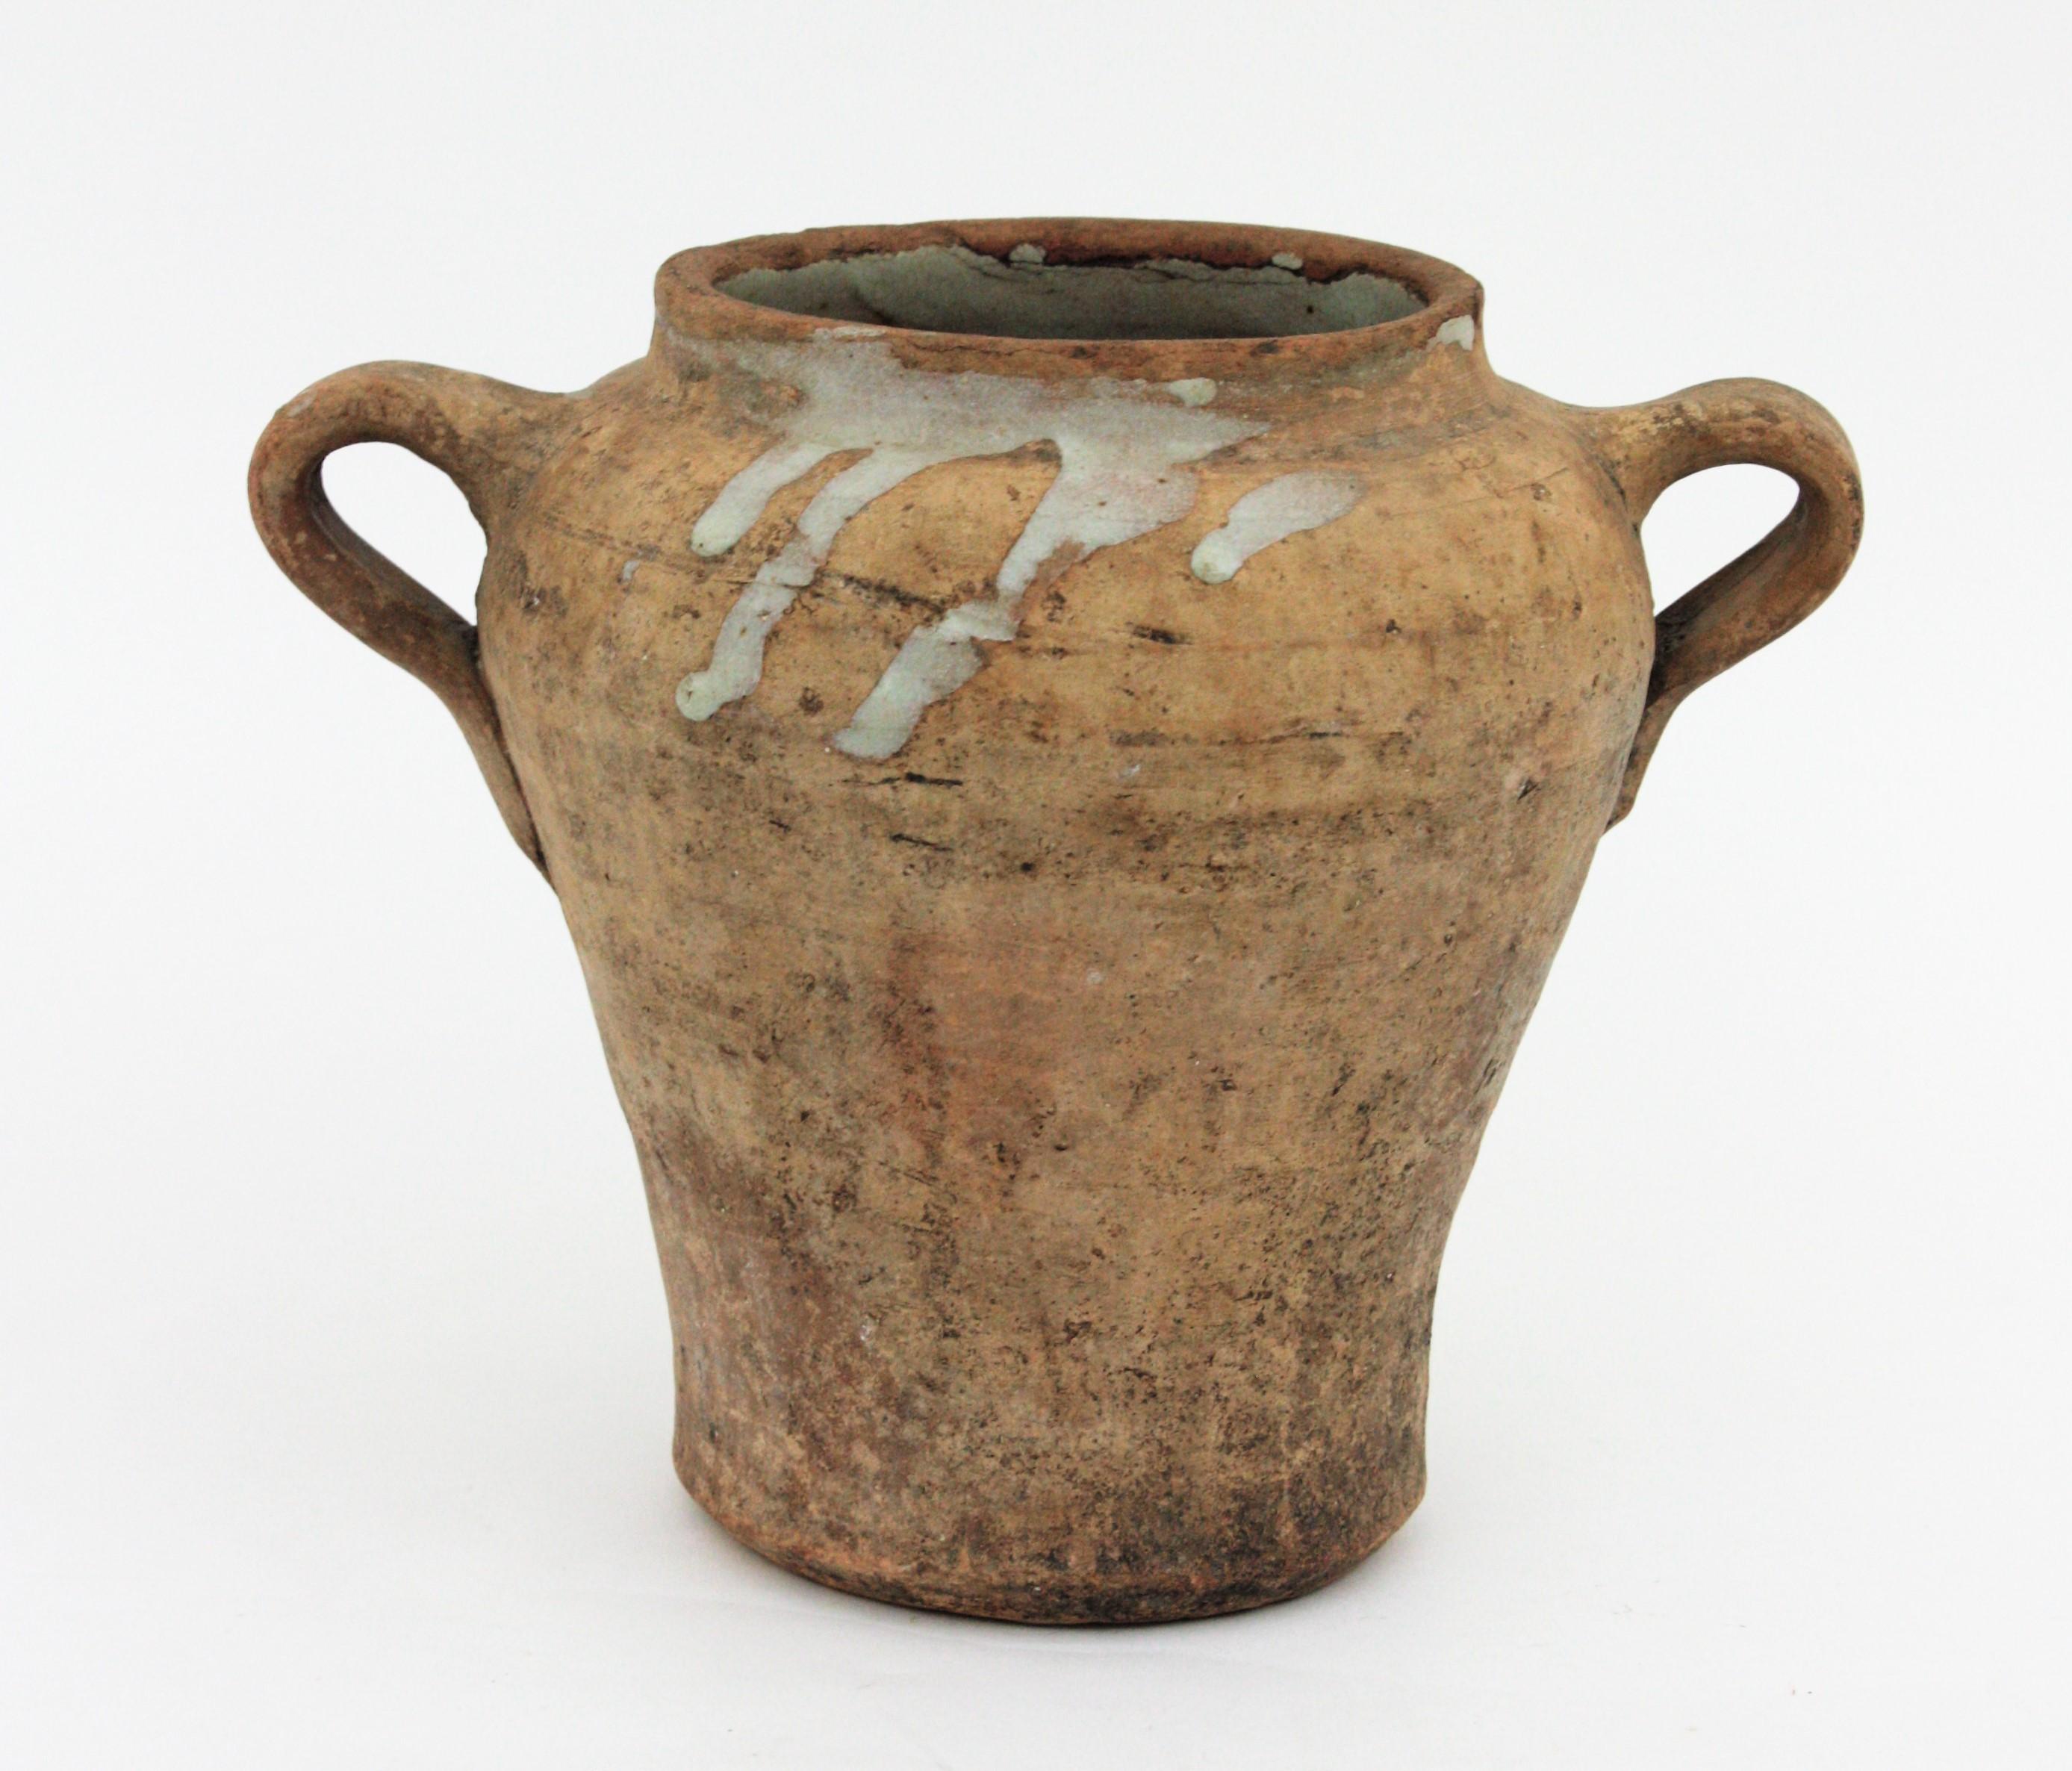 Handmade terracotta preserving pot or jar with handles from Segovia, Spain, 19th century.
Traditional Spanish ceramic 'orza'. Unglazed exterior with handles at both sides and cream color glaze at the interior to preserve olive oil and food.